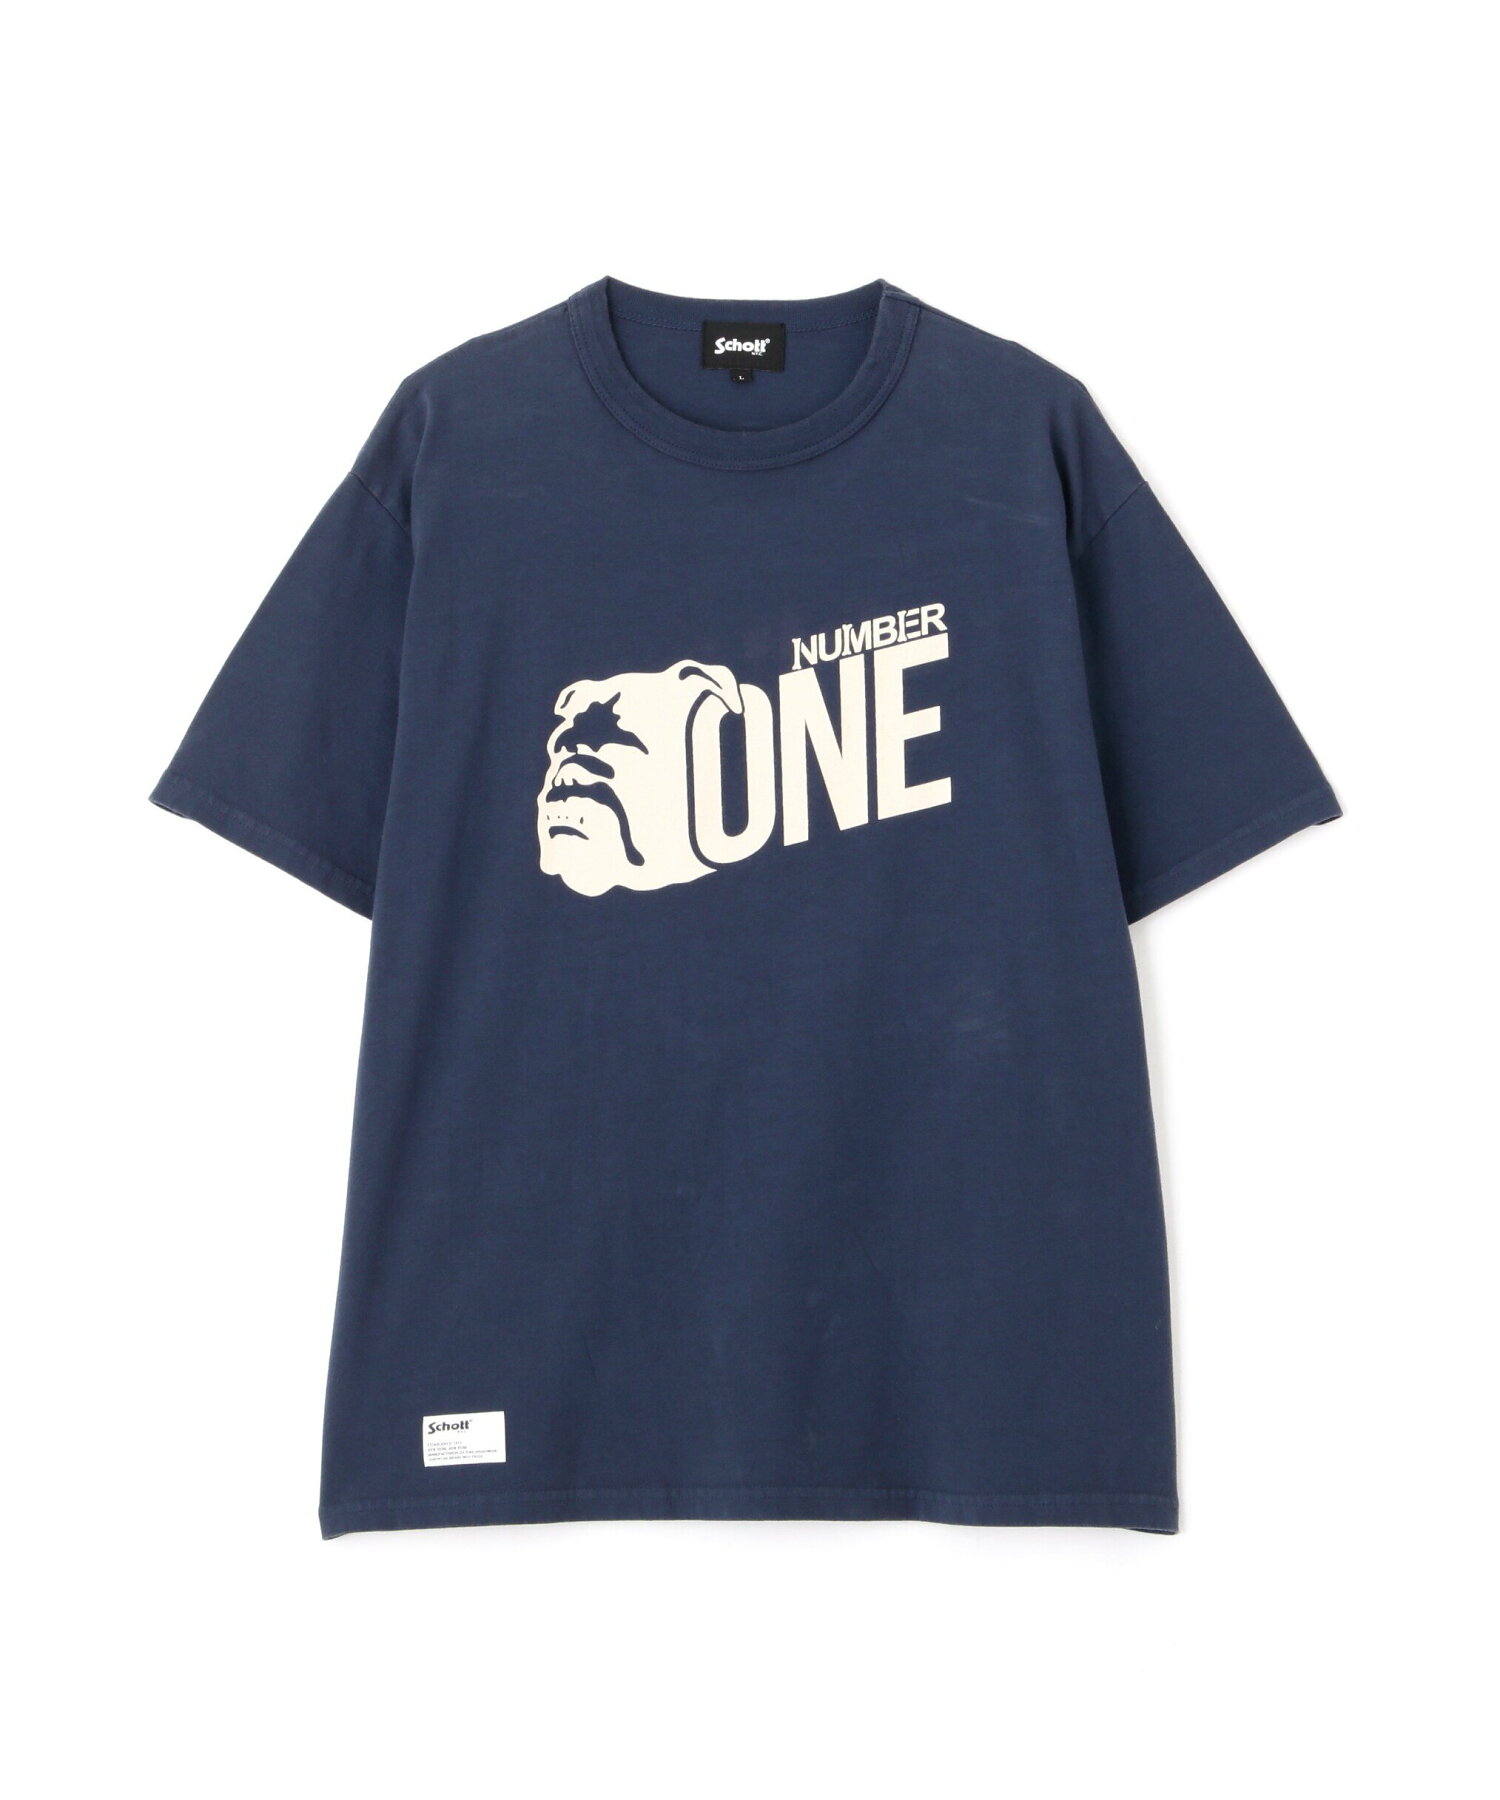 T-SHIRT "NUMBER ONE"/Tシャツ "ナンバーワン